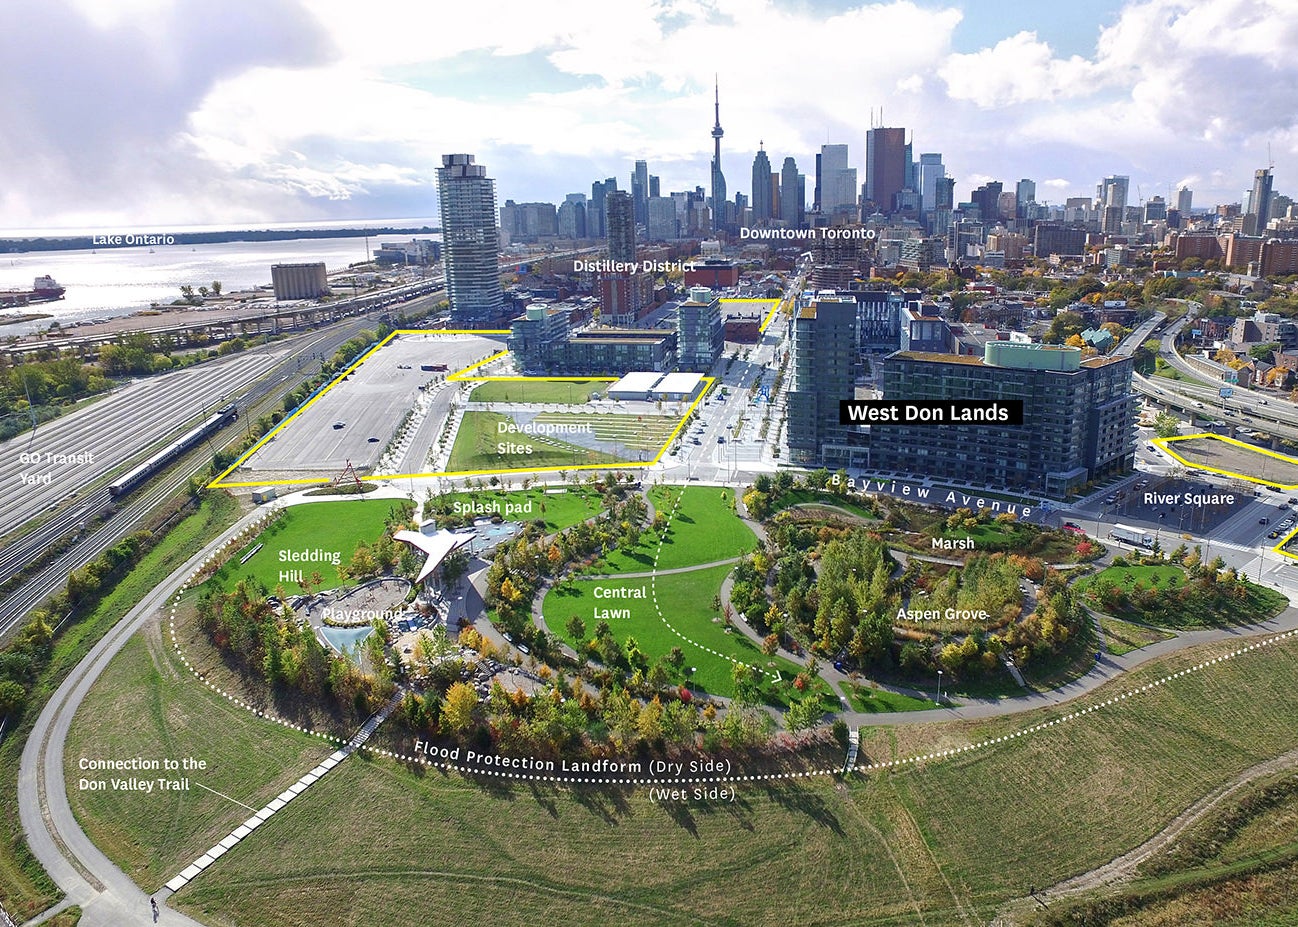 An aerial view of Corktown Common and its unique landscapes that are defined by the flood protection landform.